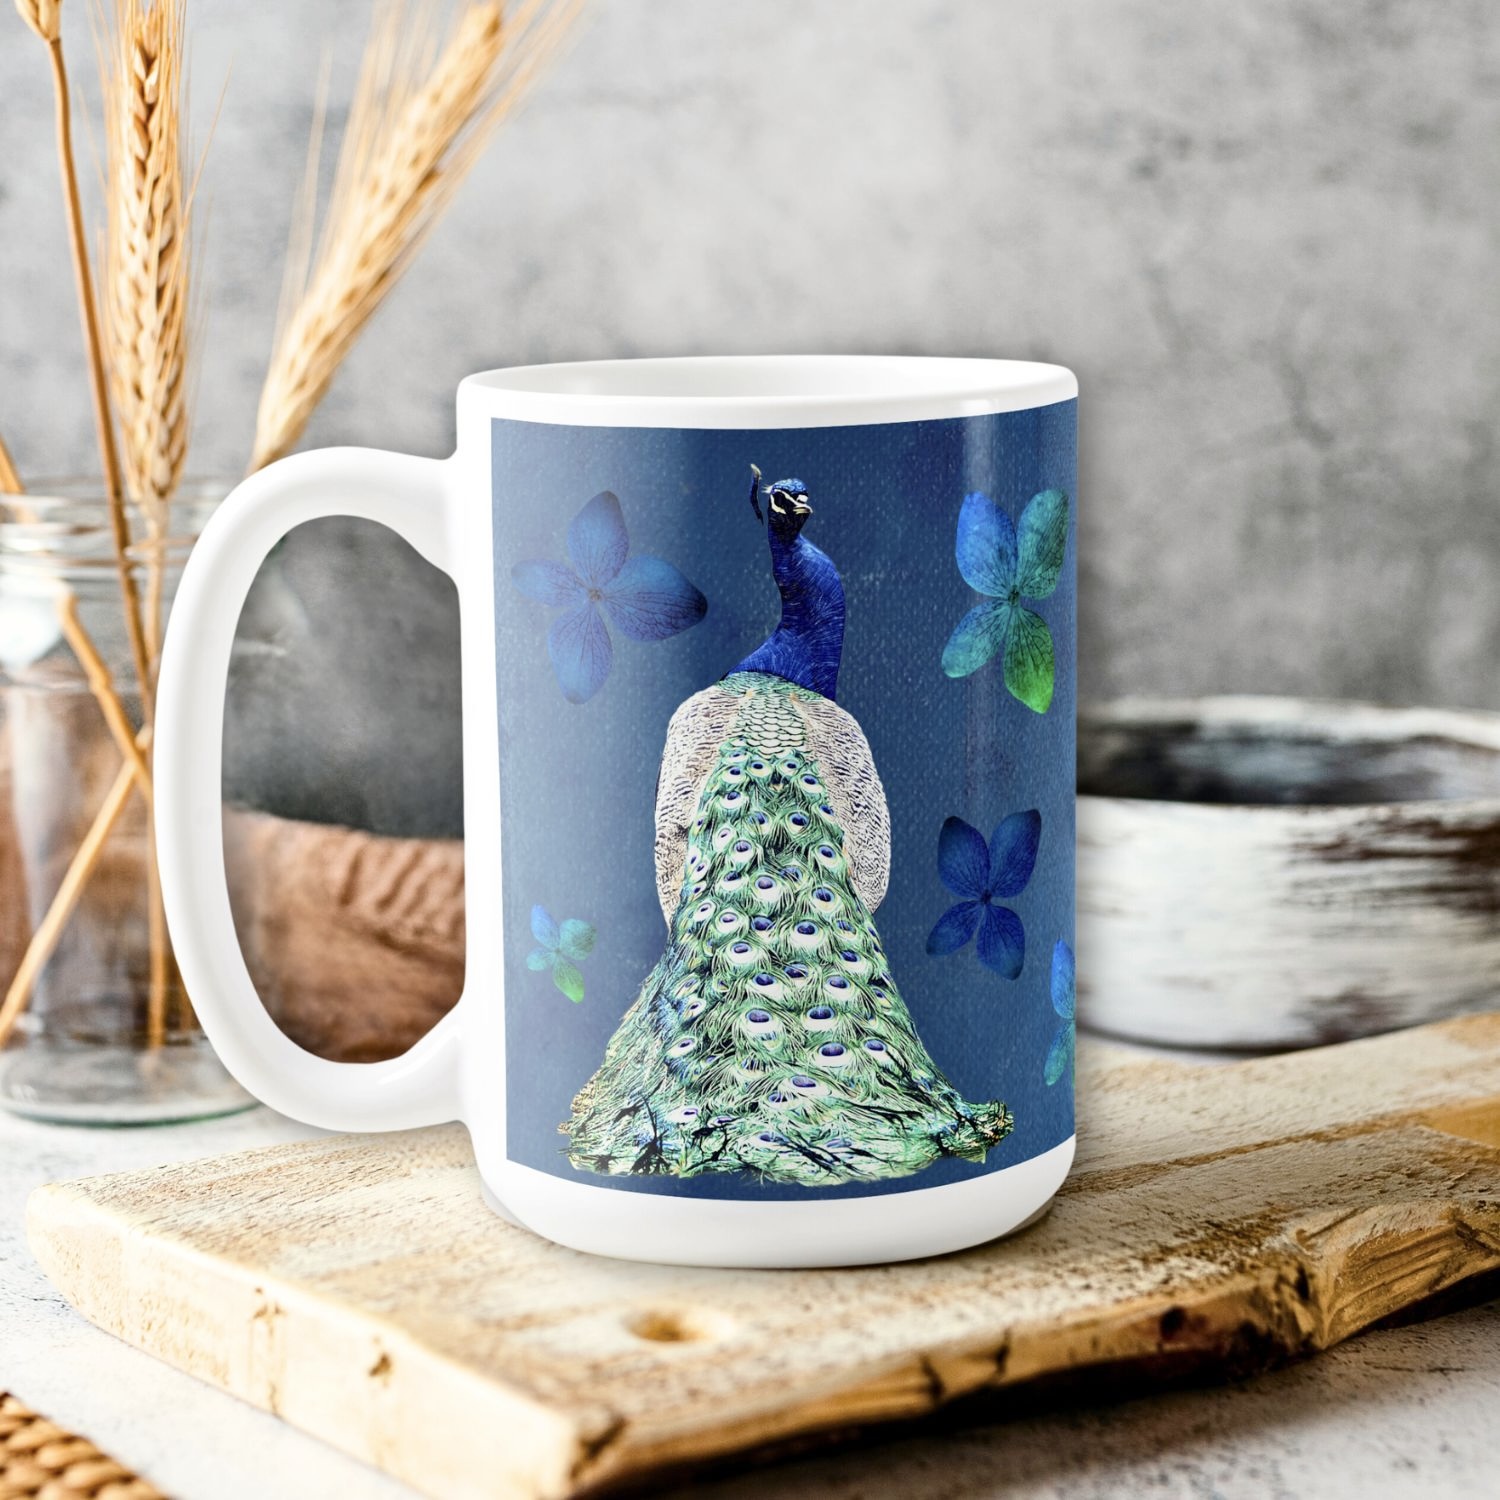 Cobalt blue mug with blue peacock and blue green flowers. Vintage style.